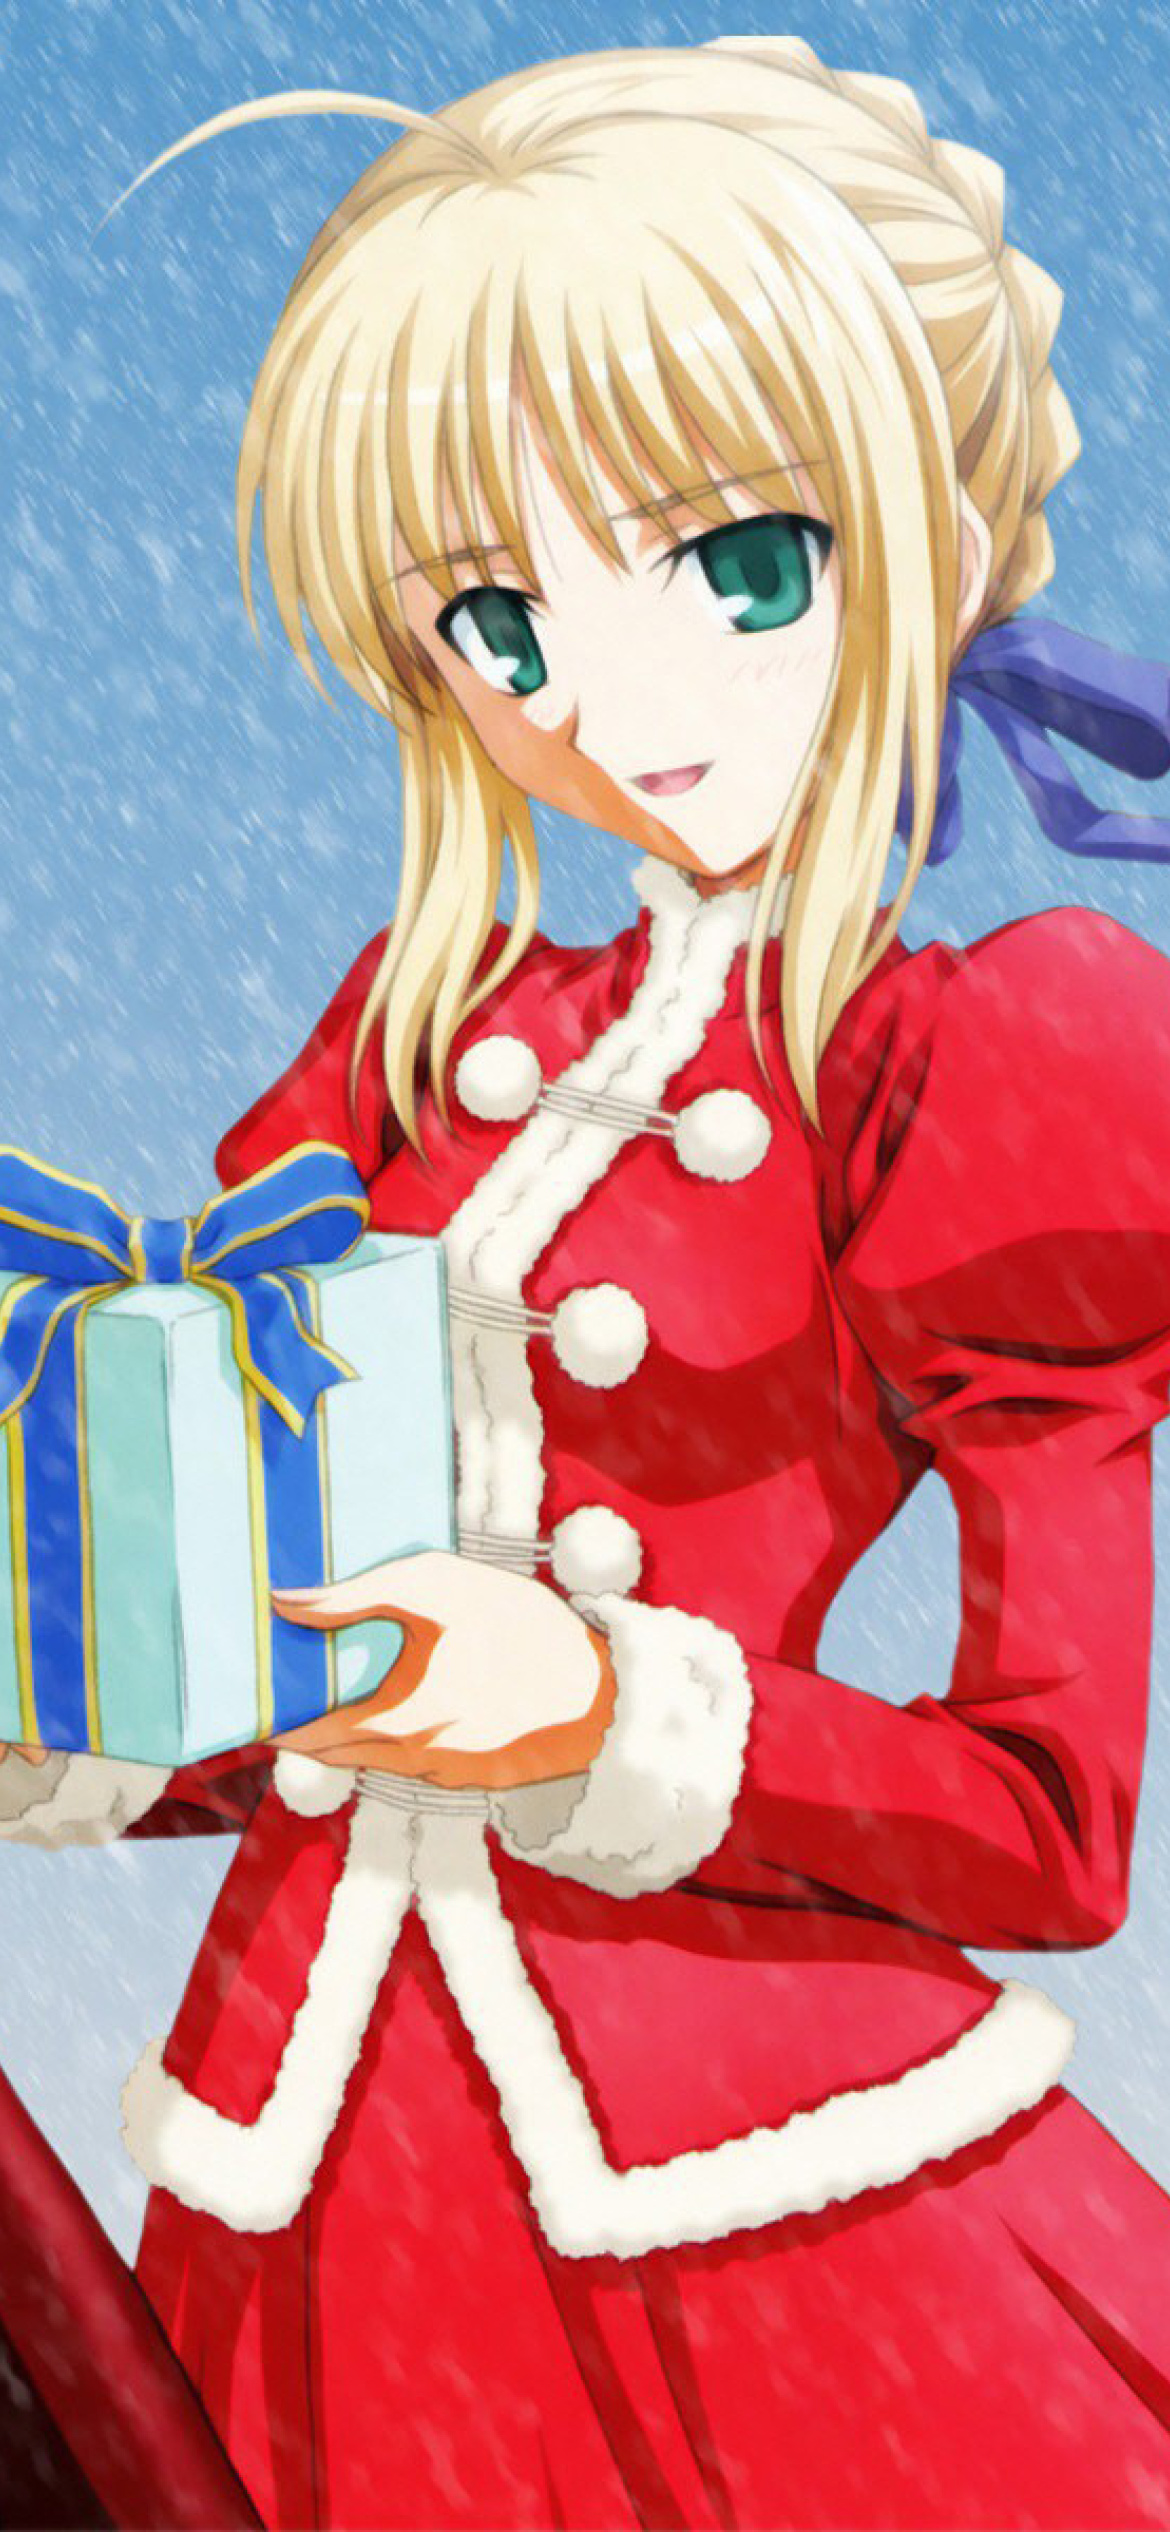 Anime Christmas Wallpaper For Iphone 11 Pro